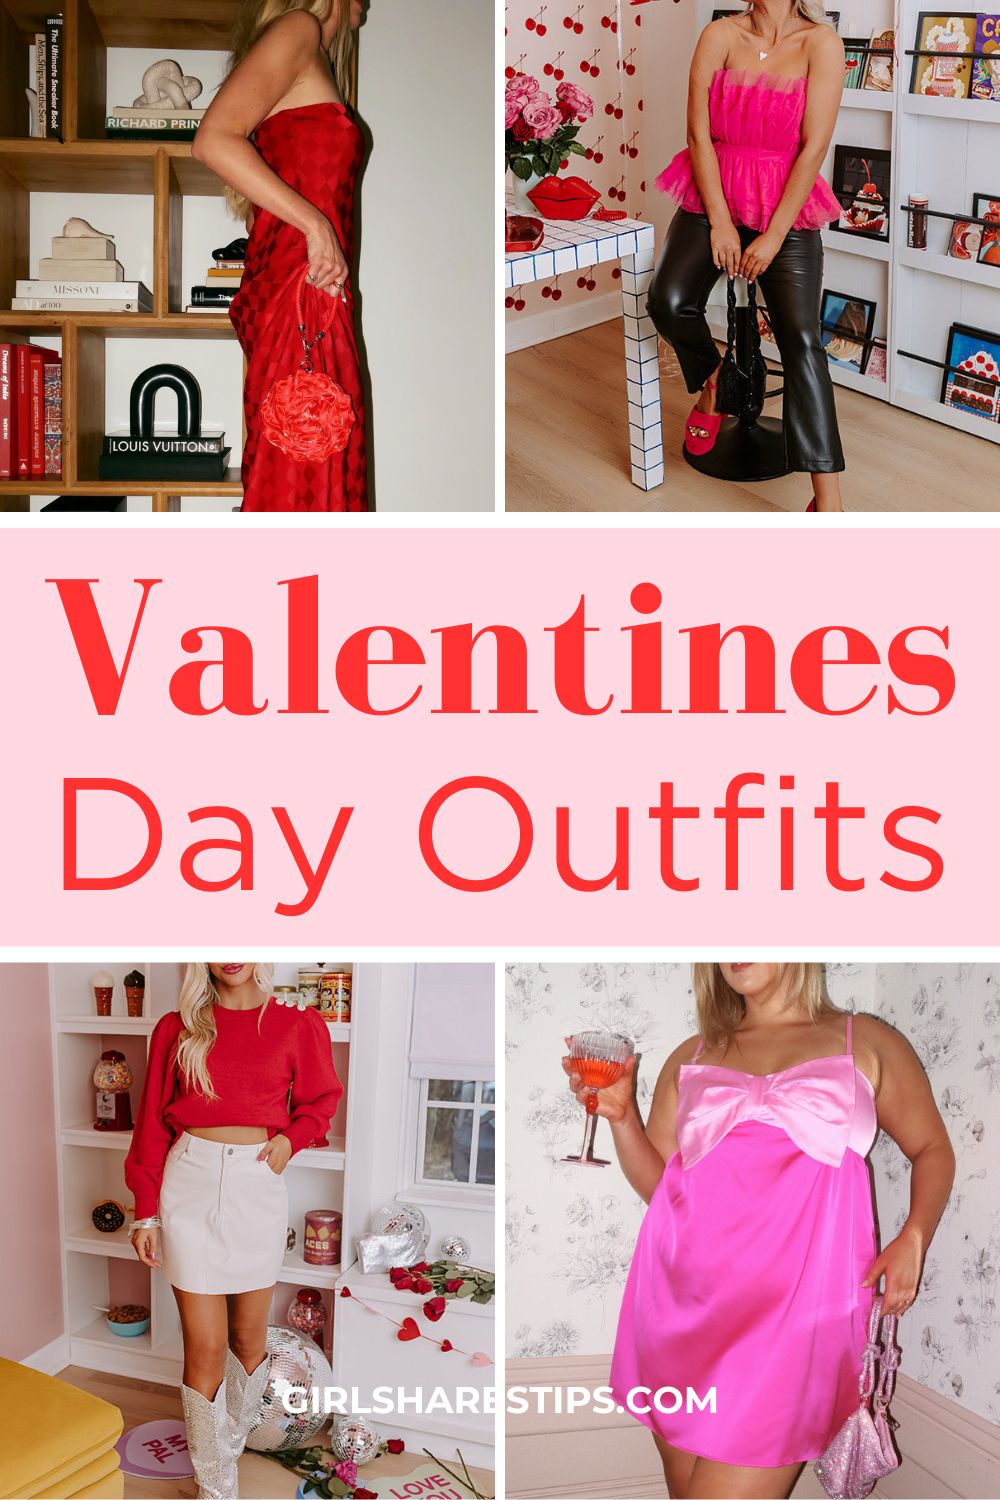 Valentines Day outfits collage